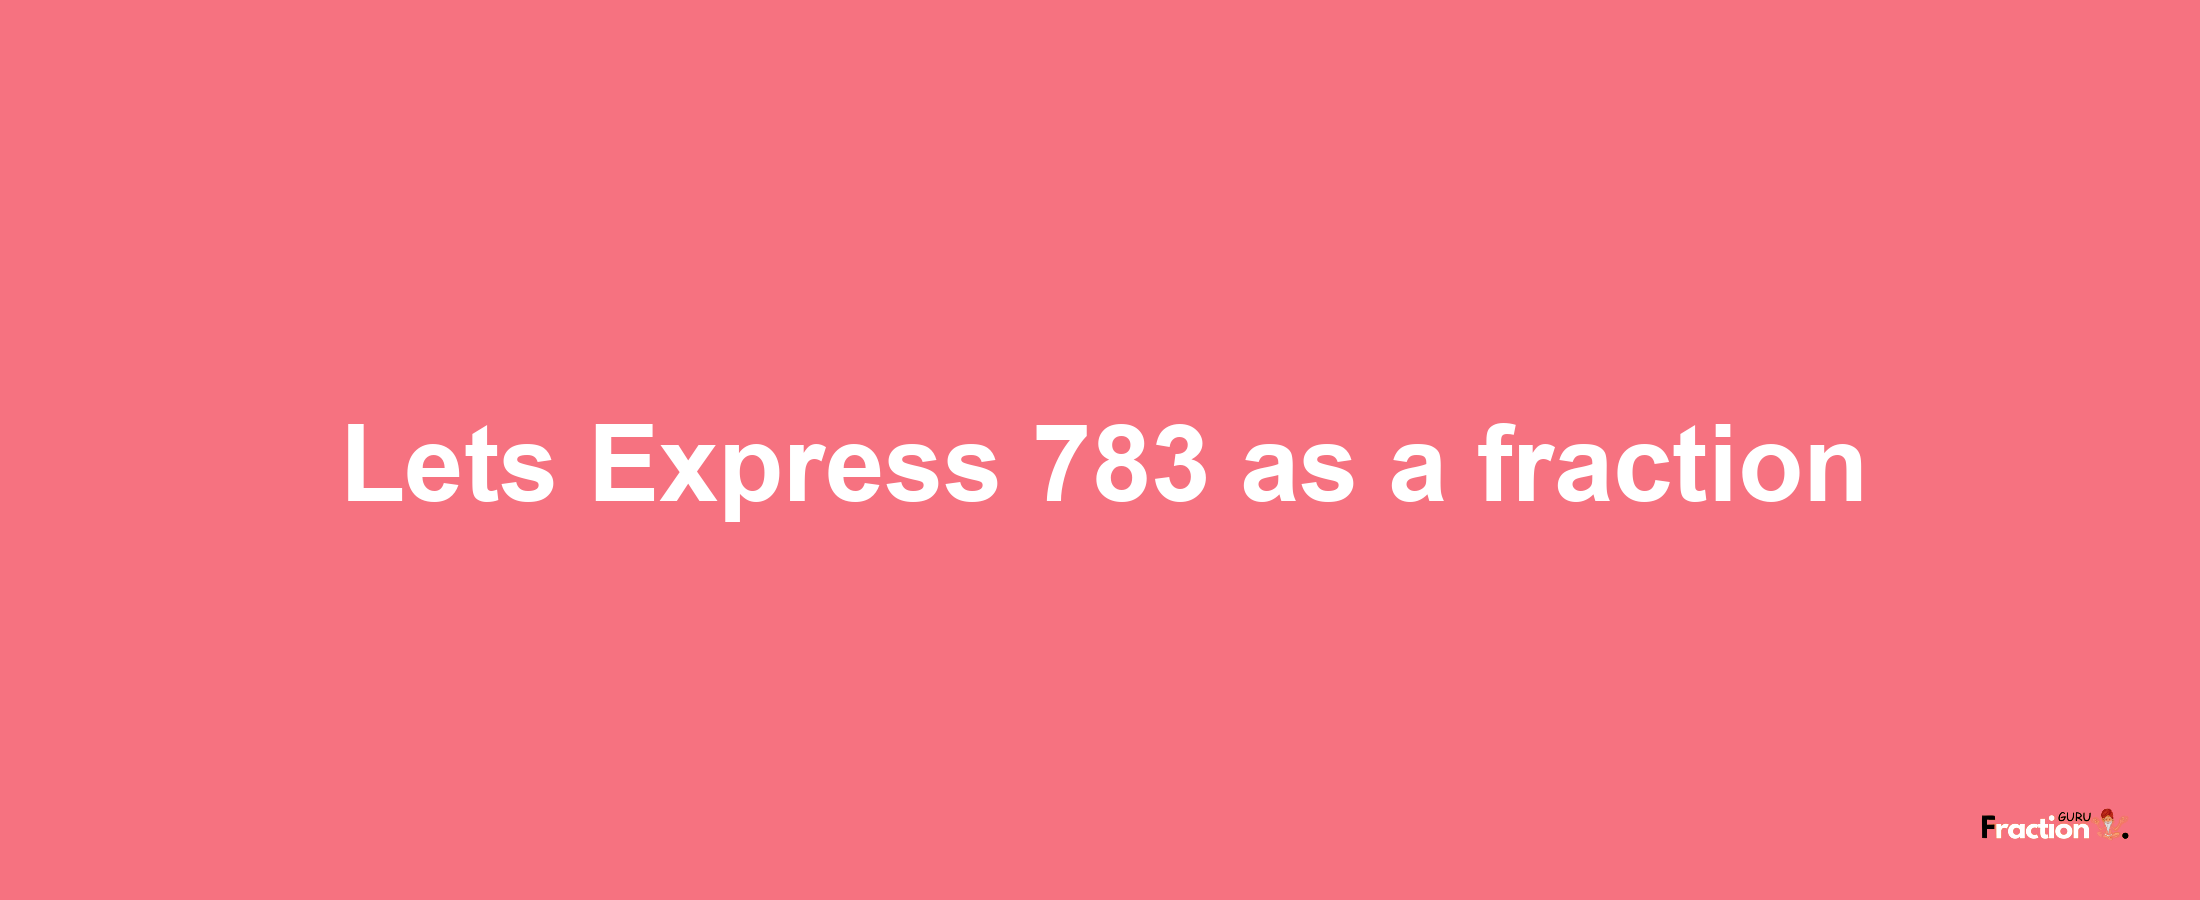 Lets Express 783 as afraction